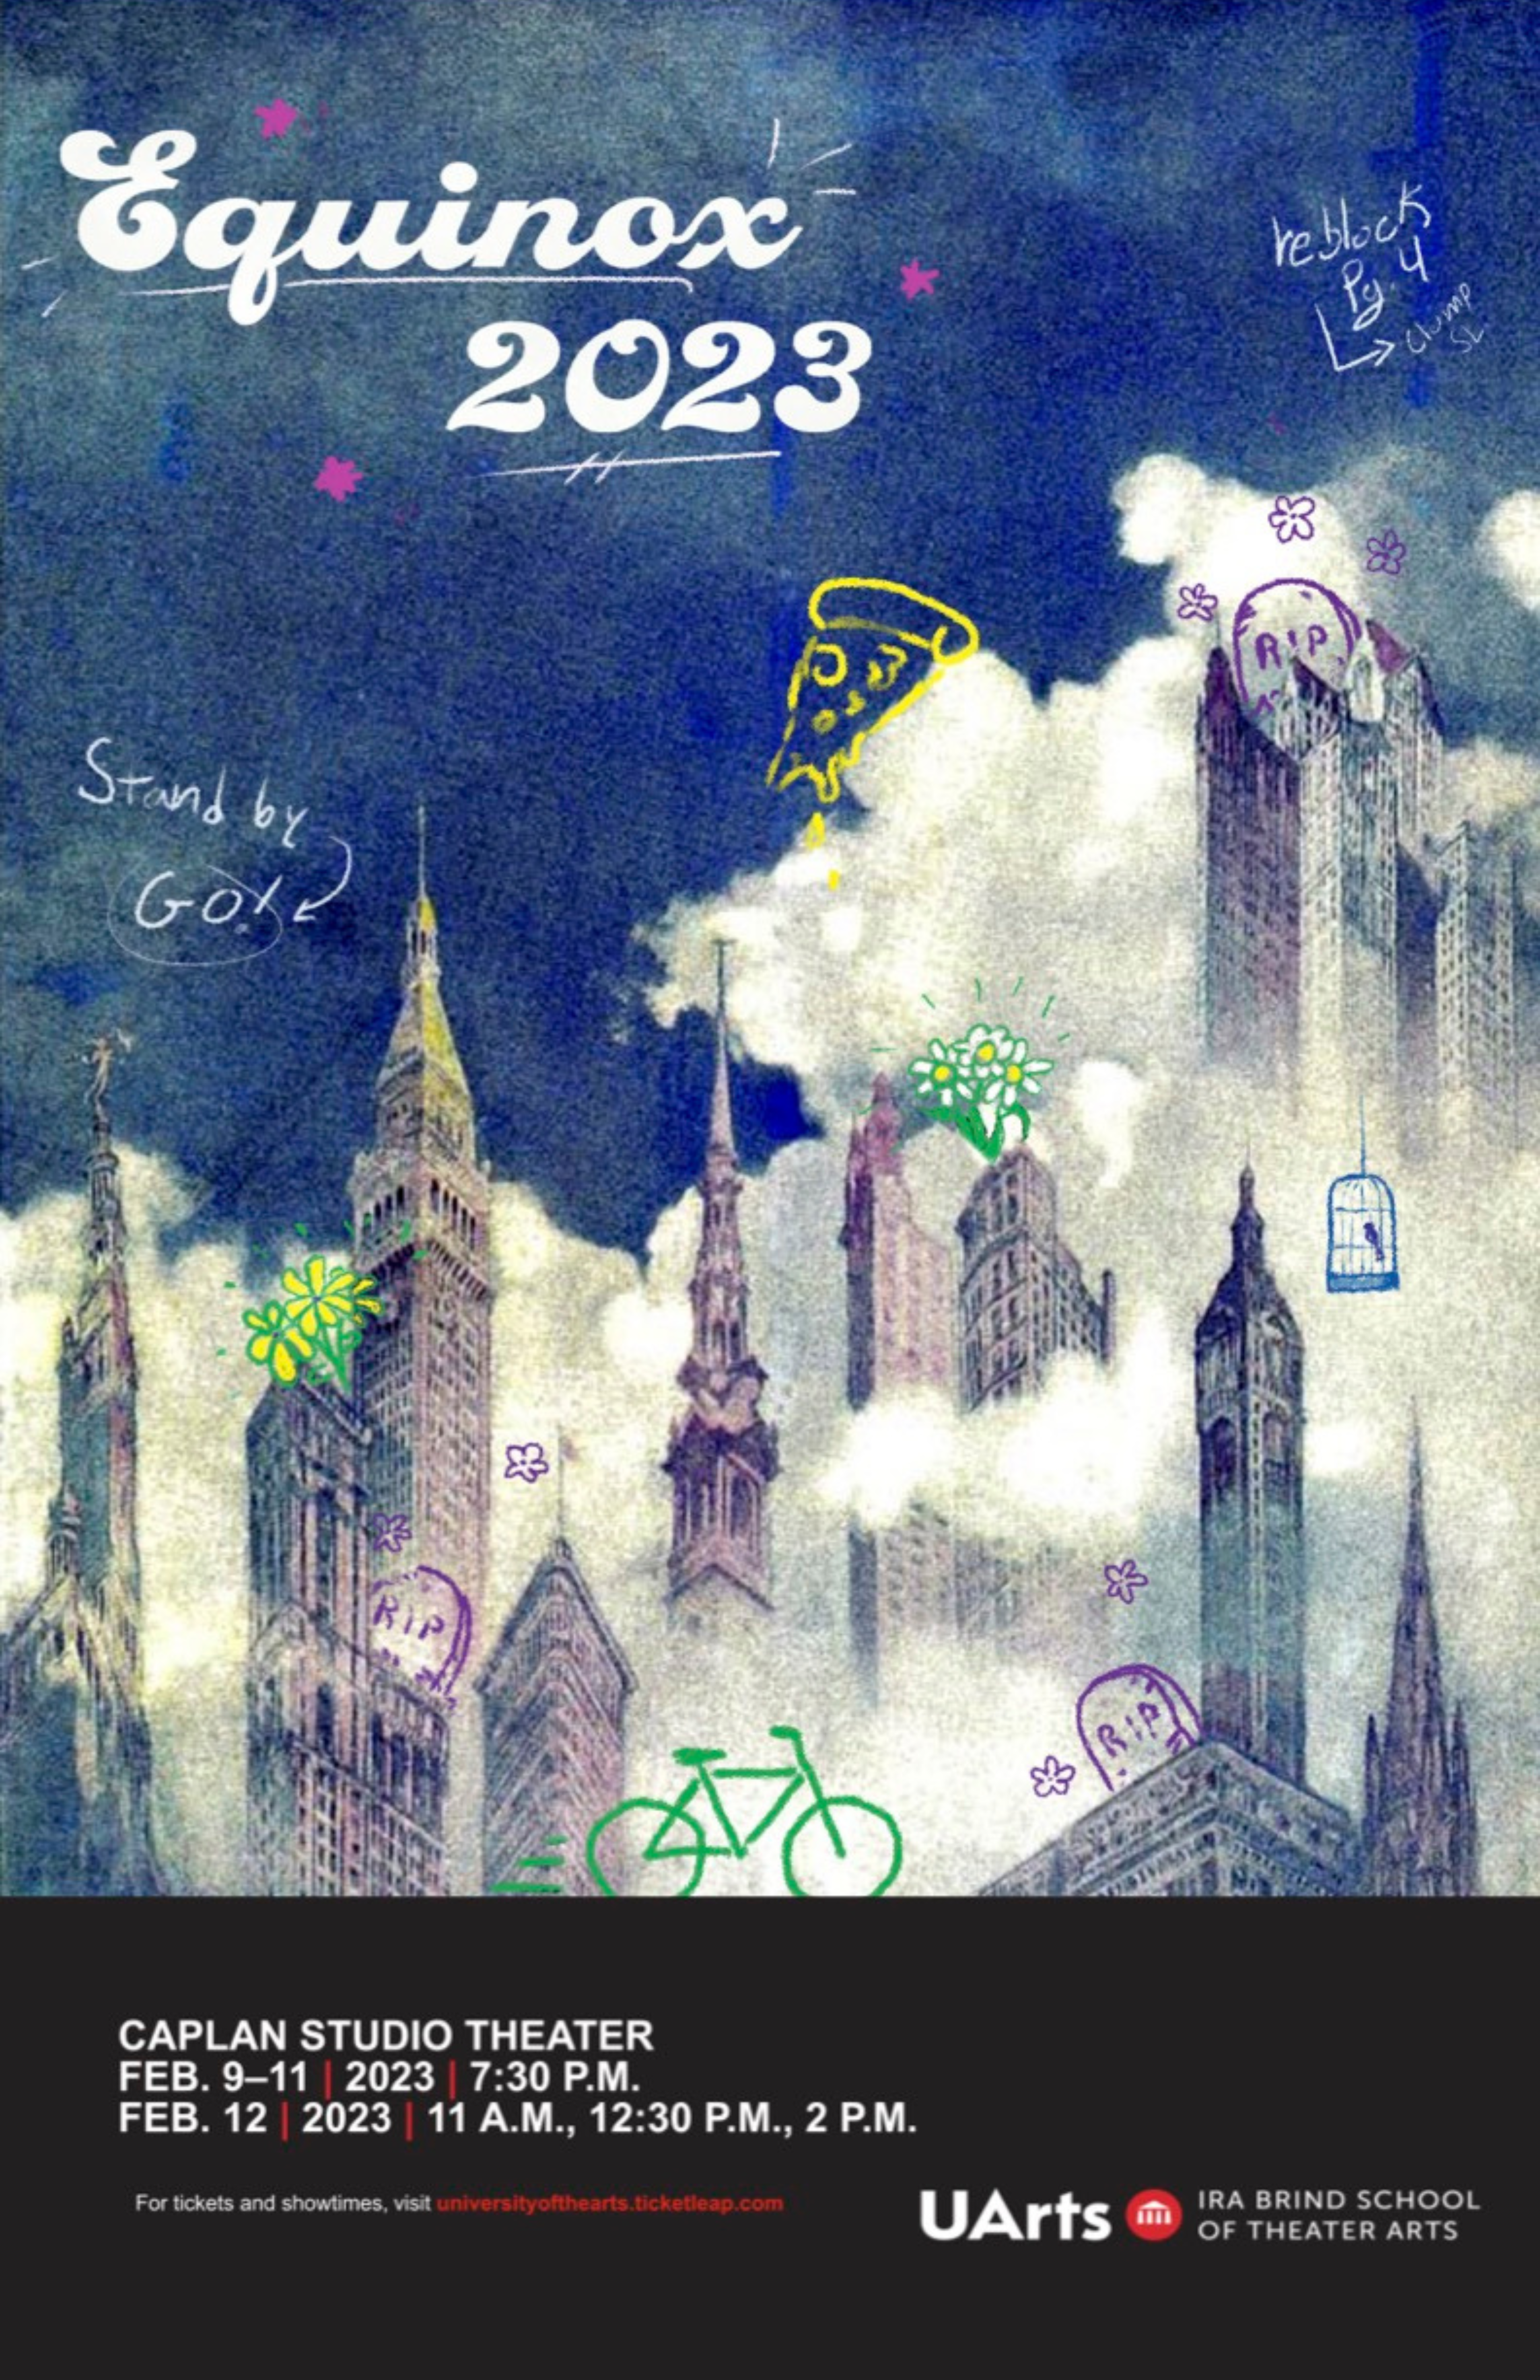 A background of different blues in the sjy with clouds. Between the clouds is a city skyline. In the foreground, there are doodles of yellow pizza, green bikes, flowers, and purple tombstones reading RIP. The top left corner reads “Equinox 2023”. The bottom has a black bar which reads “Caplan Studio Theater Feb. 9–11, 2023, 7:30 P.M.” and “Feb. 12, 2023, 11 A.M., 12:30 P.M., 2 P.M.”. “For tickets and showtimes, visit universityofthearts.ticketleap.com” .